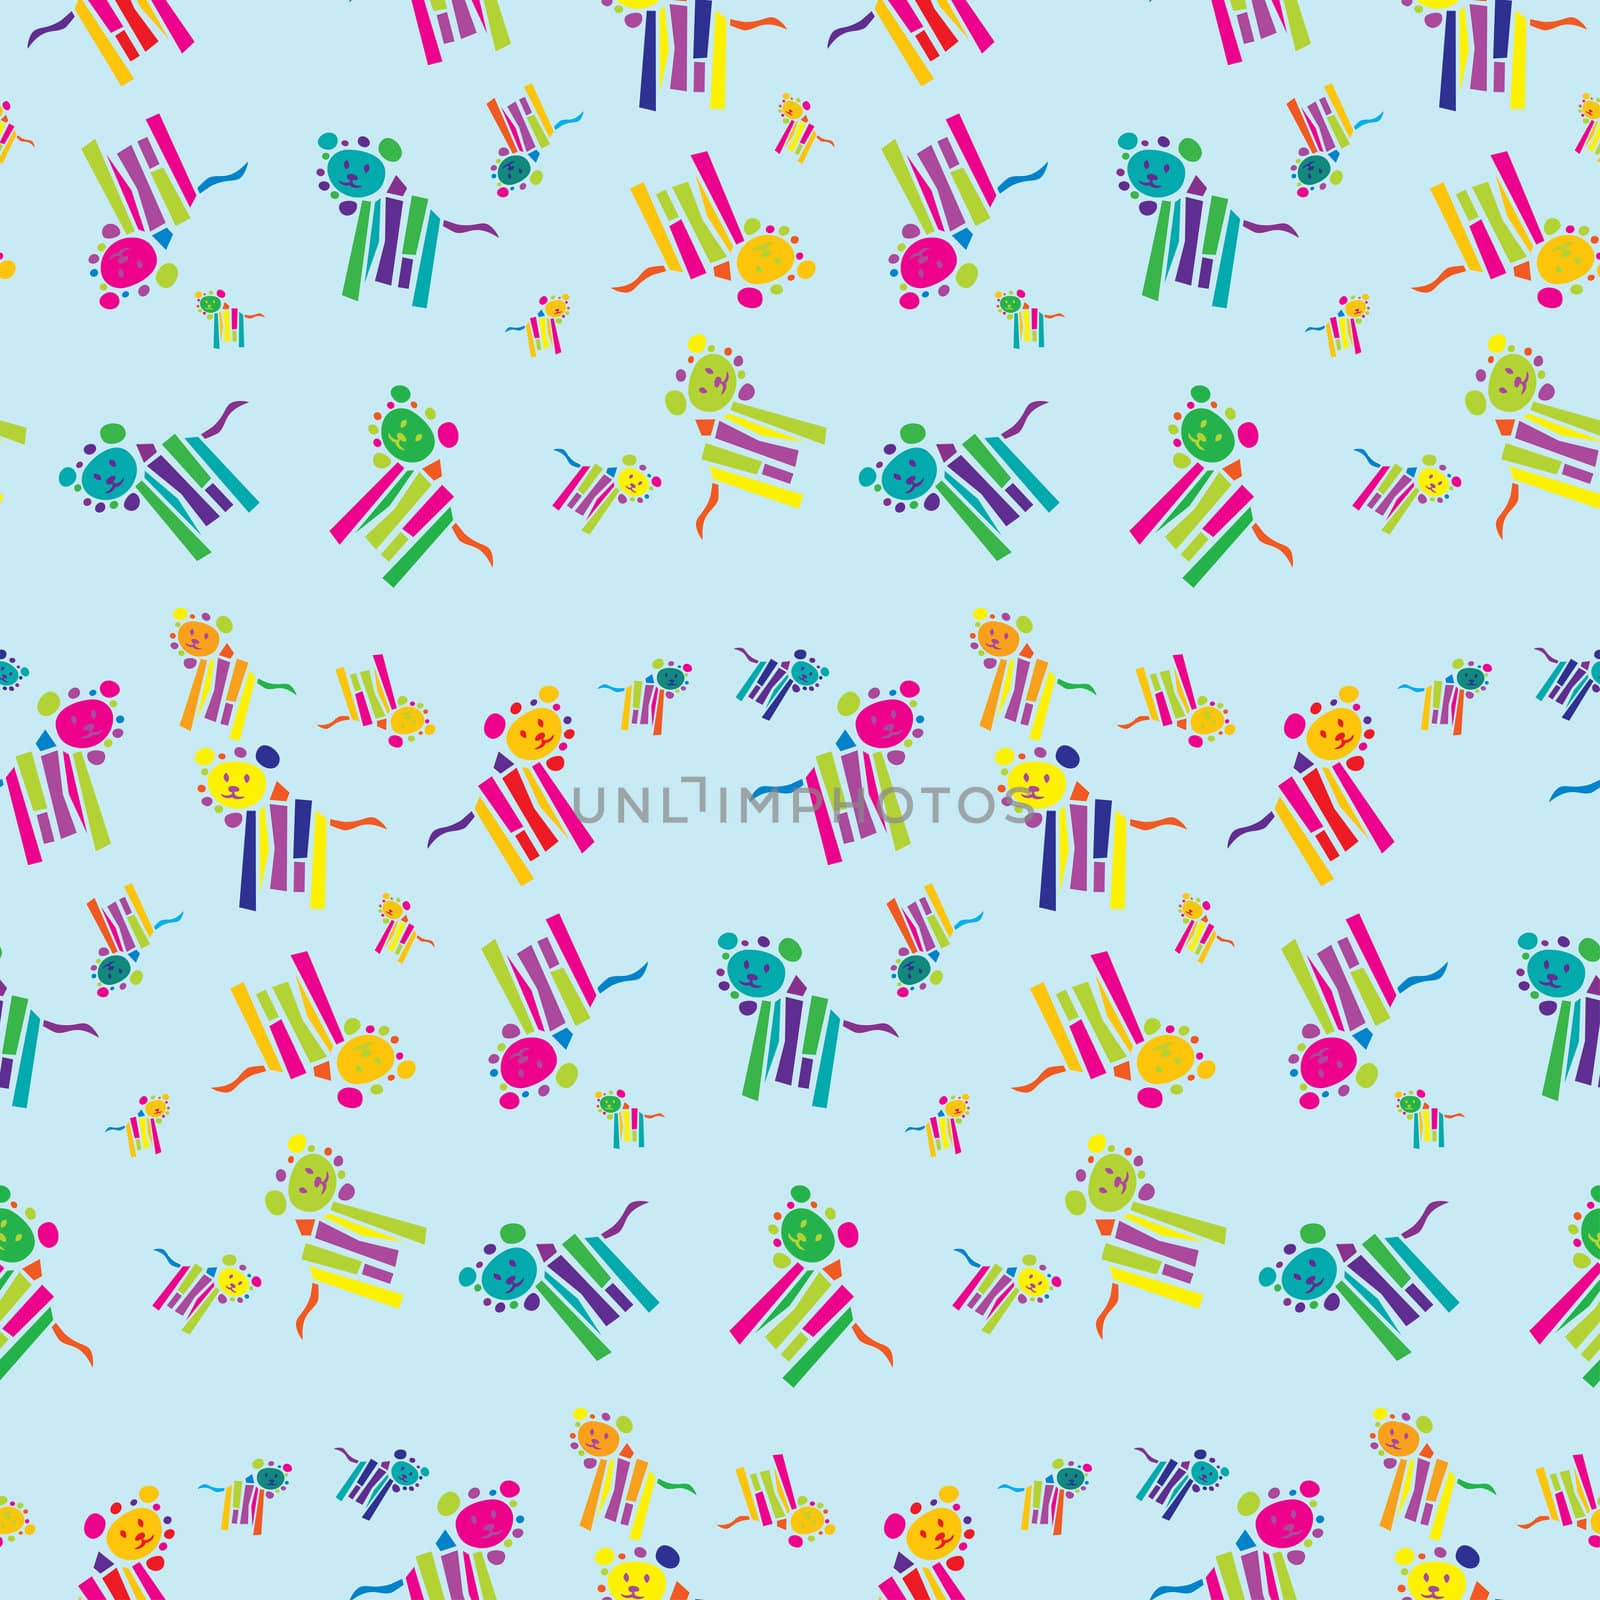 Cute lions in a colorful seamless background pattern